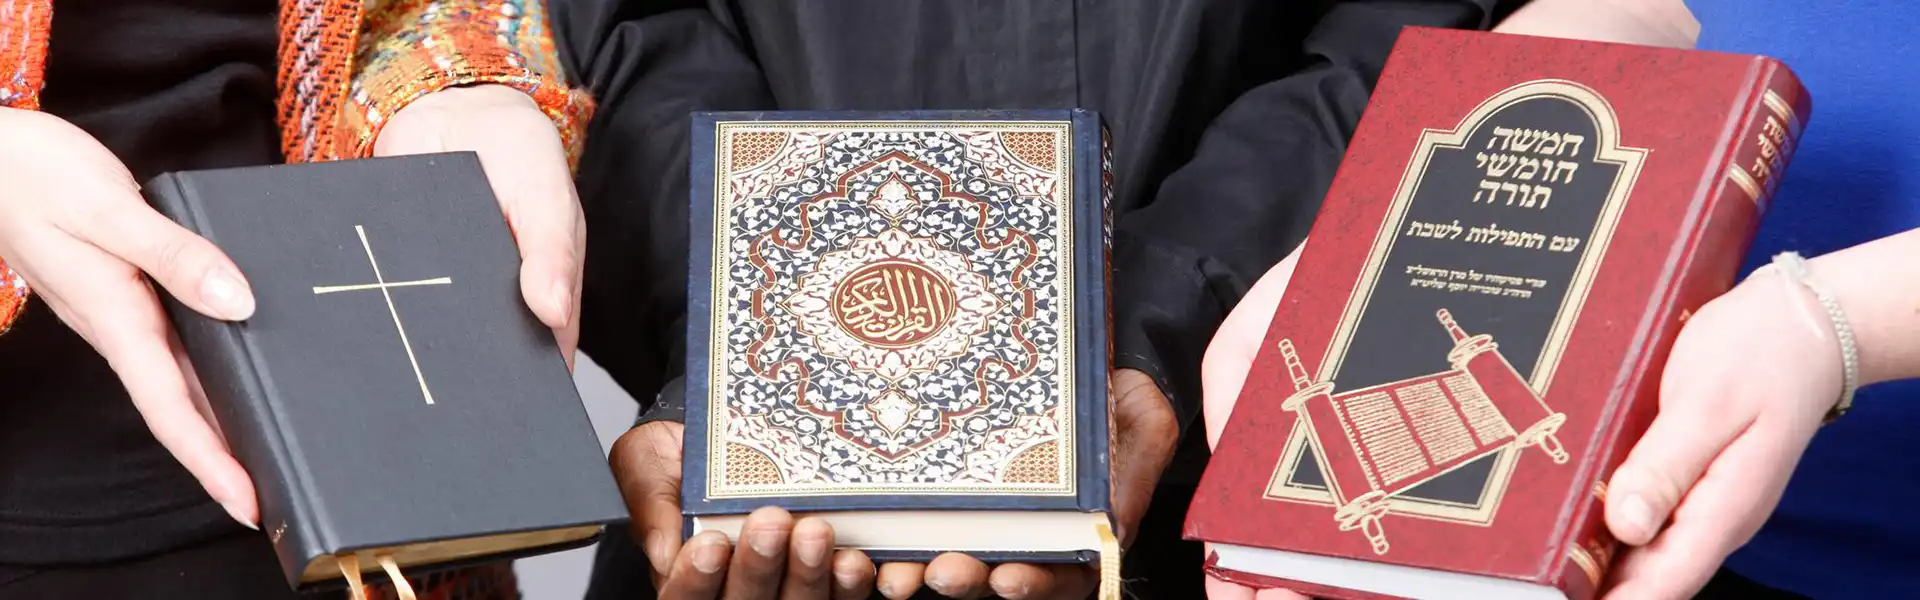 A close-up on the hands of 3 people holding a Christian bible, the Quran, and the Torah